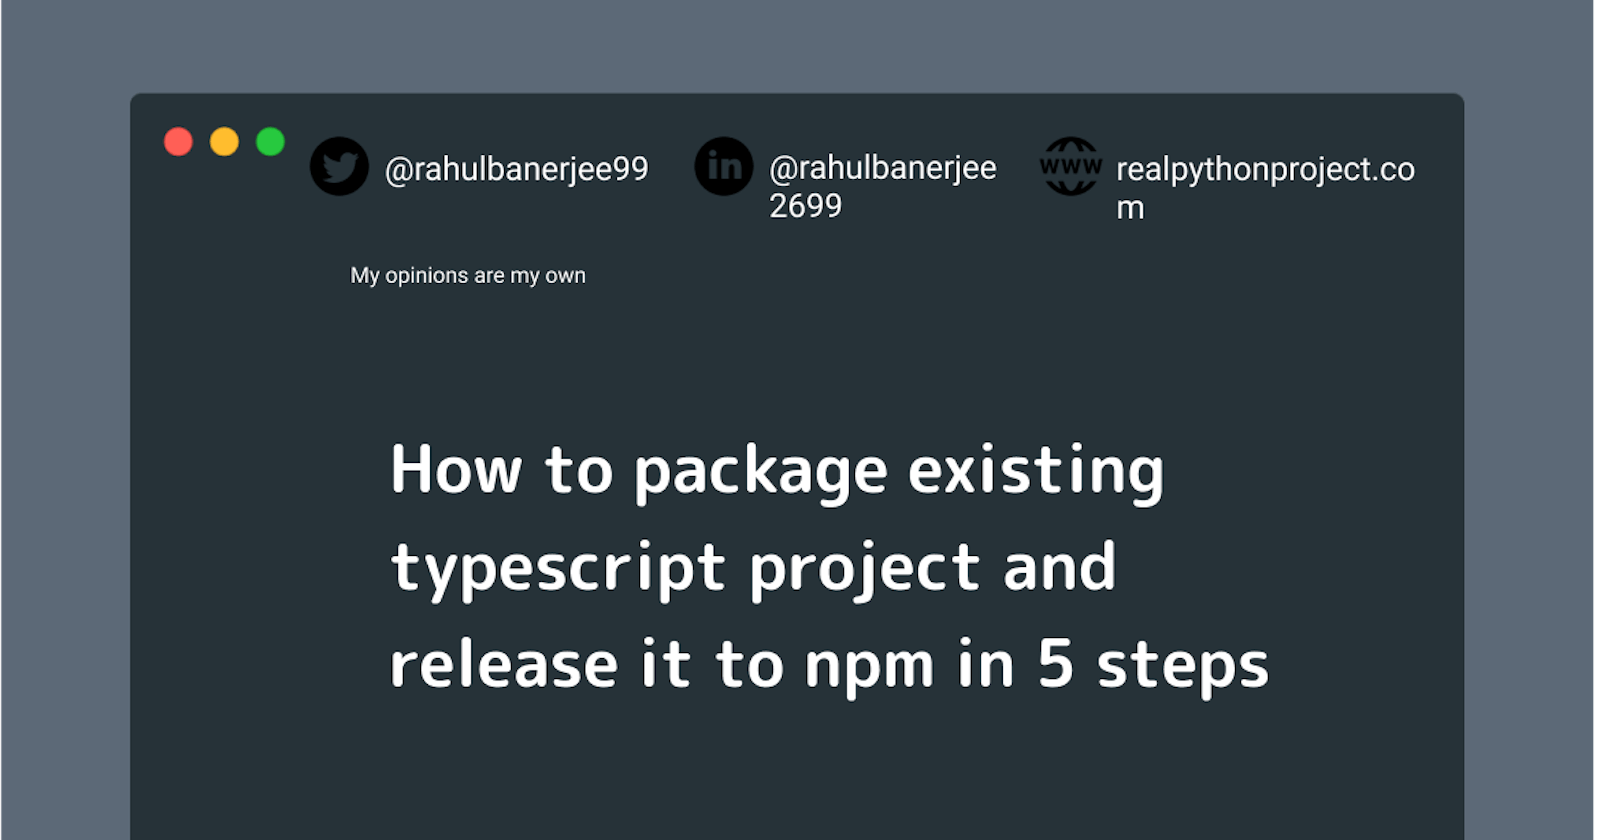 How to package an existing typescript project and release it on npm in 5 steps